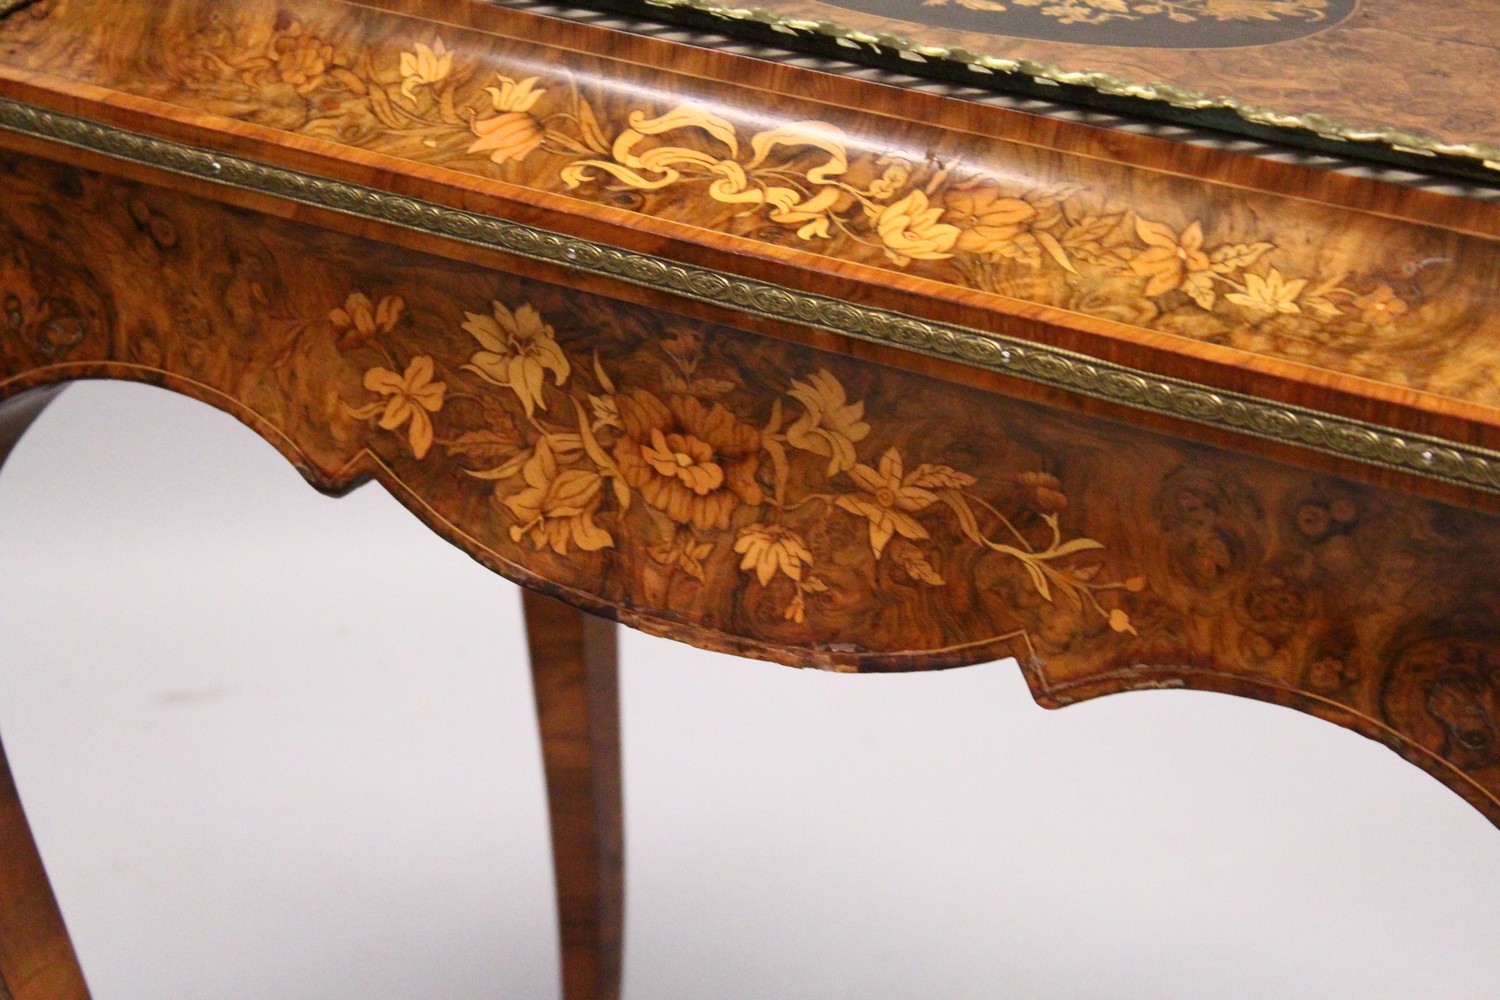 A 19TH CENTURY BURR WALNUT, ORMOLU AND MARQUETRY JARDINIERE, with removable cover, zinc liner, on - Image 10 of 10